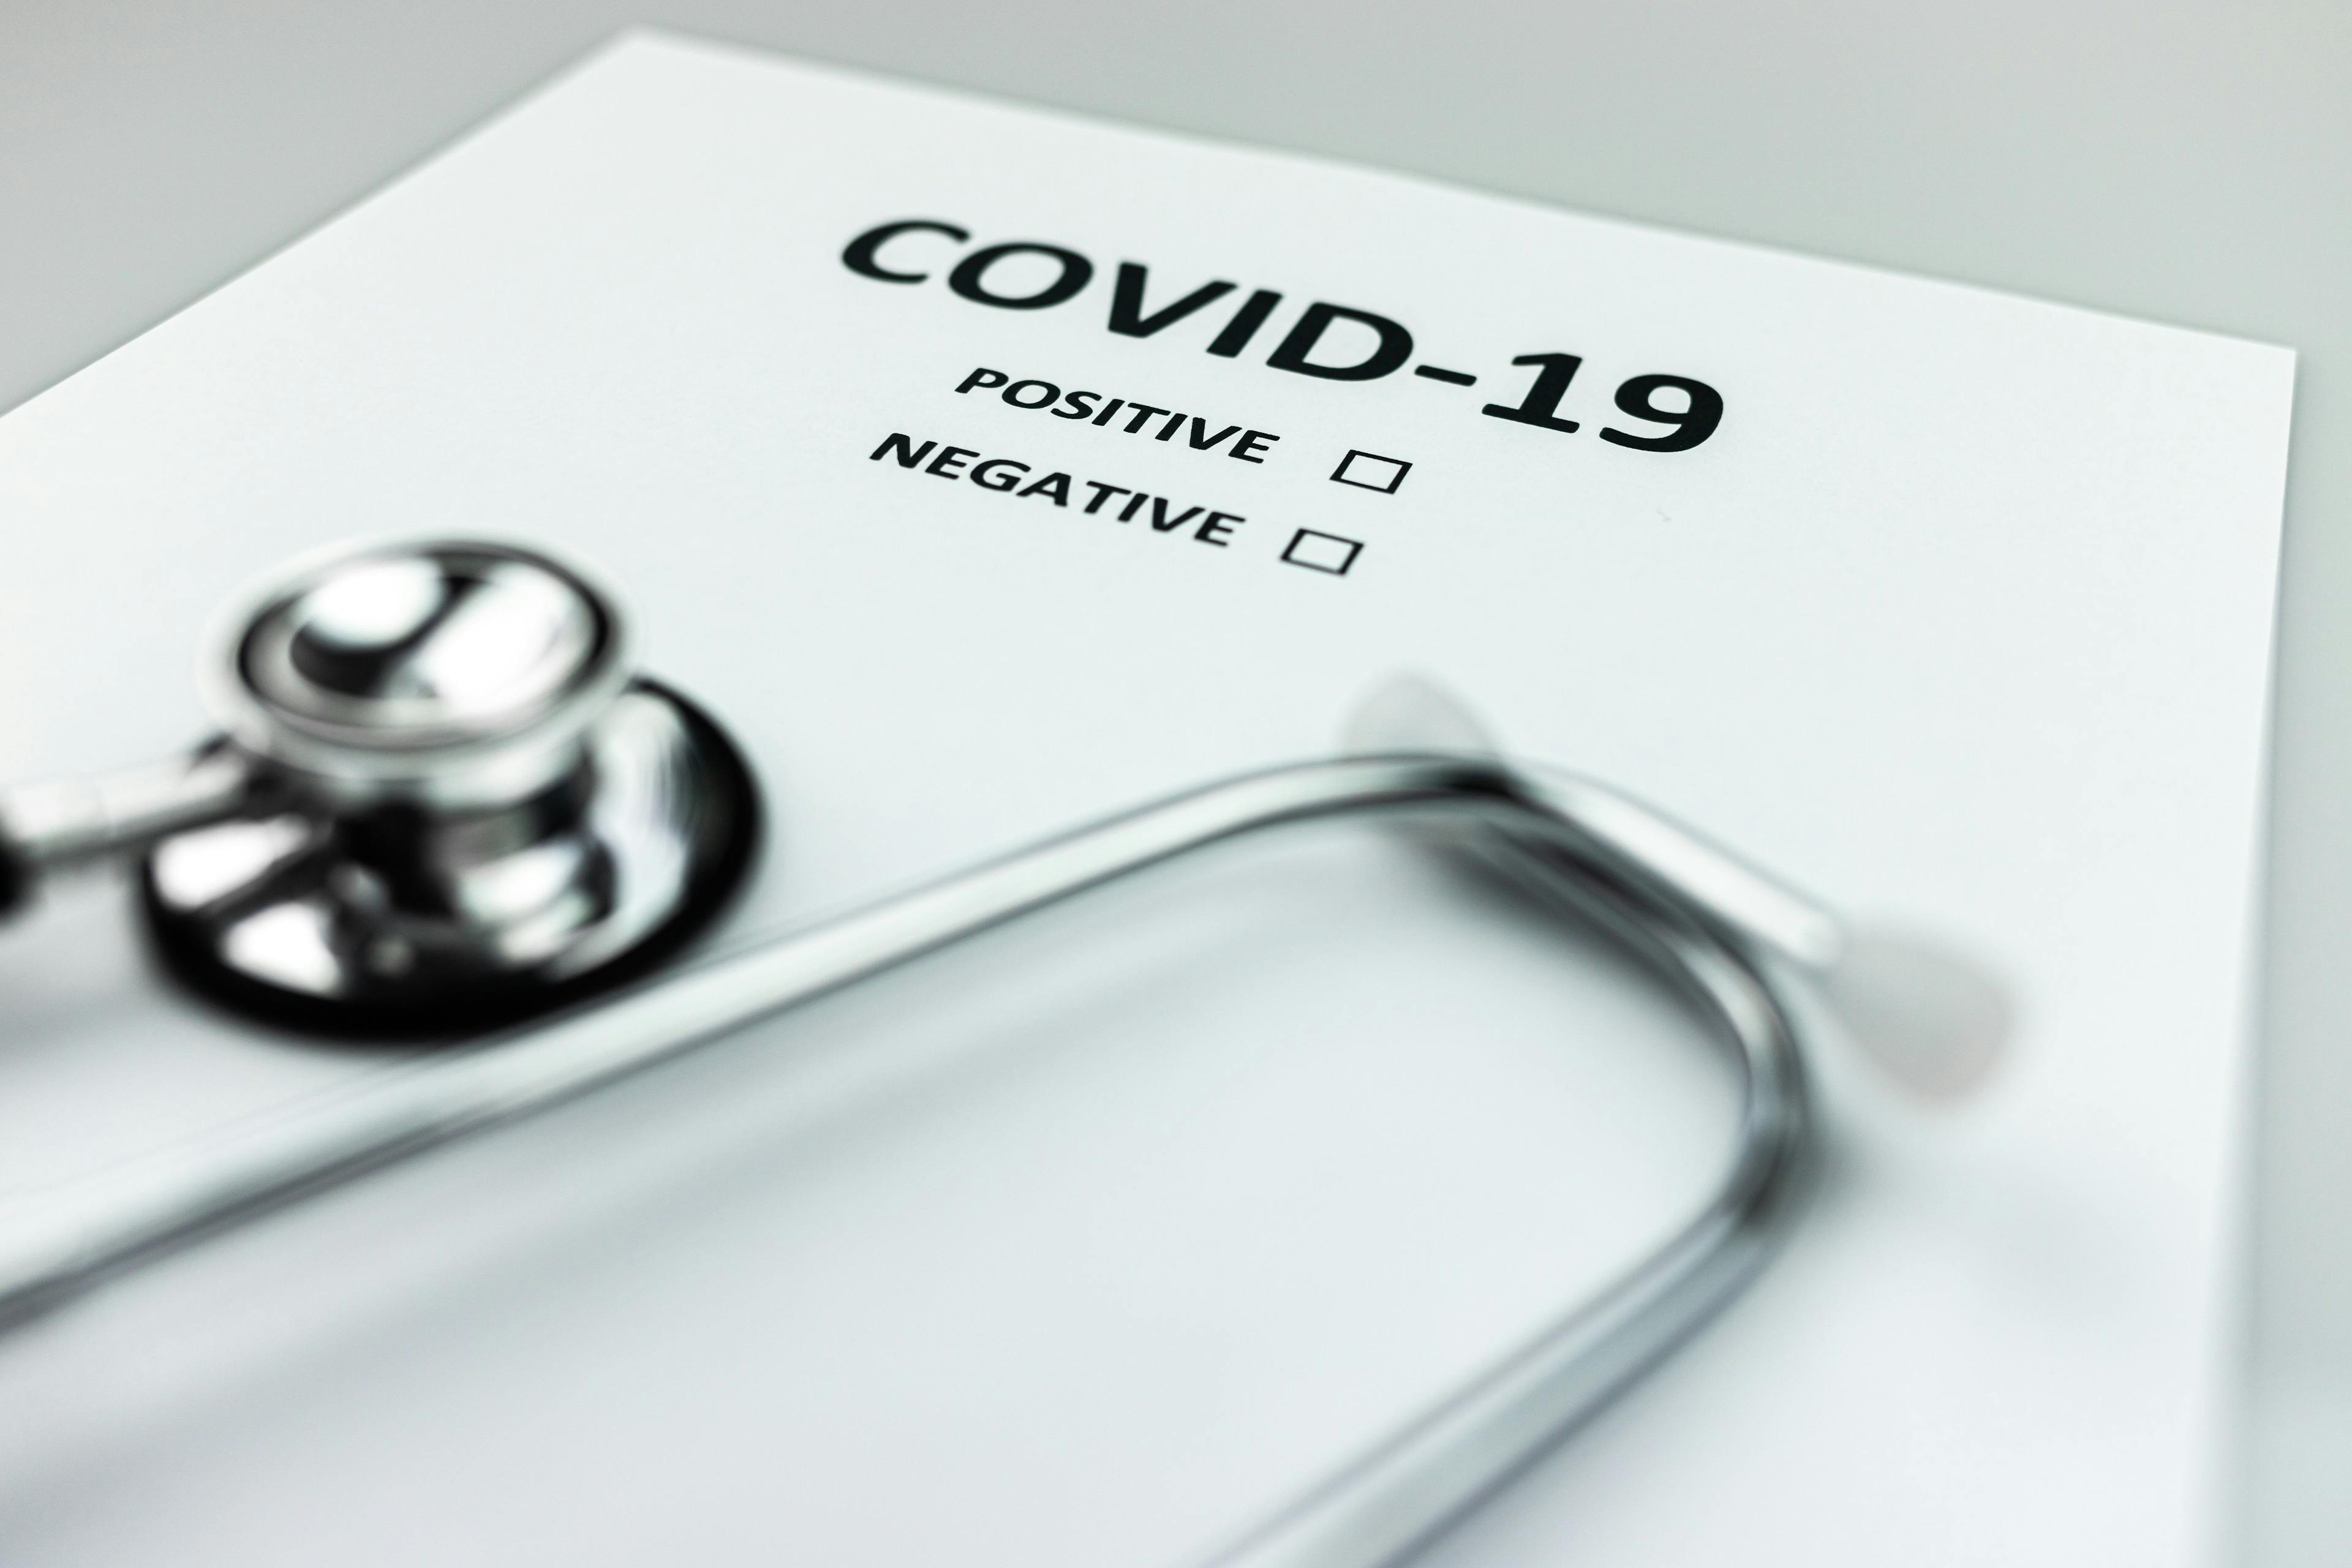  Gather More Info As COVID-19 Testing Expands